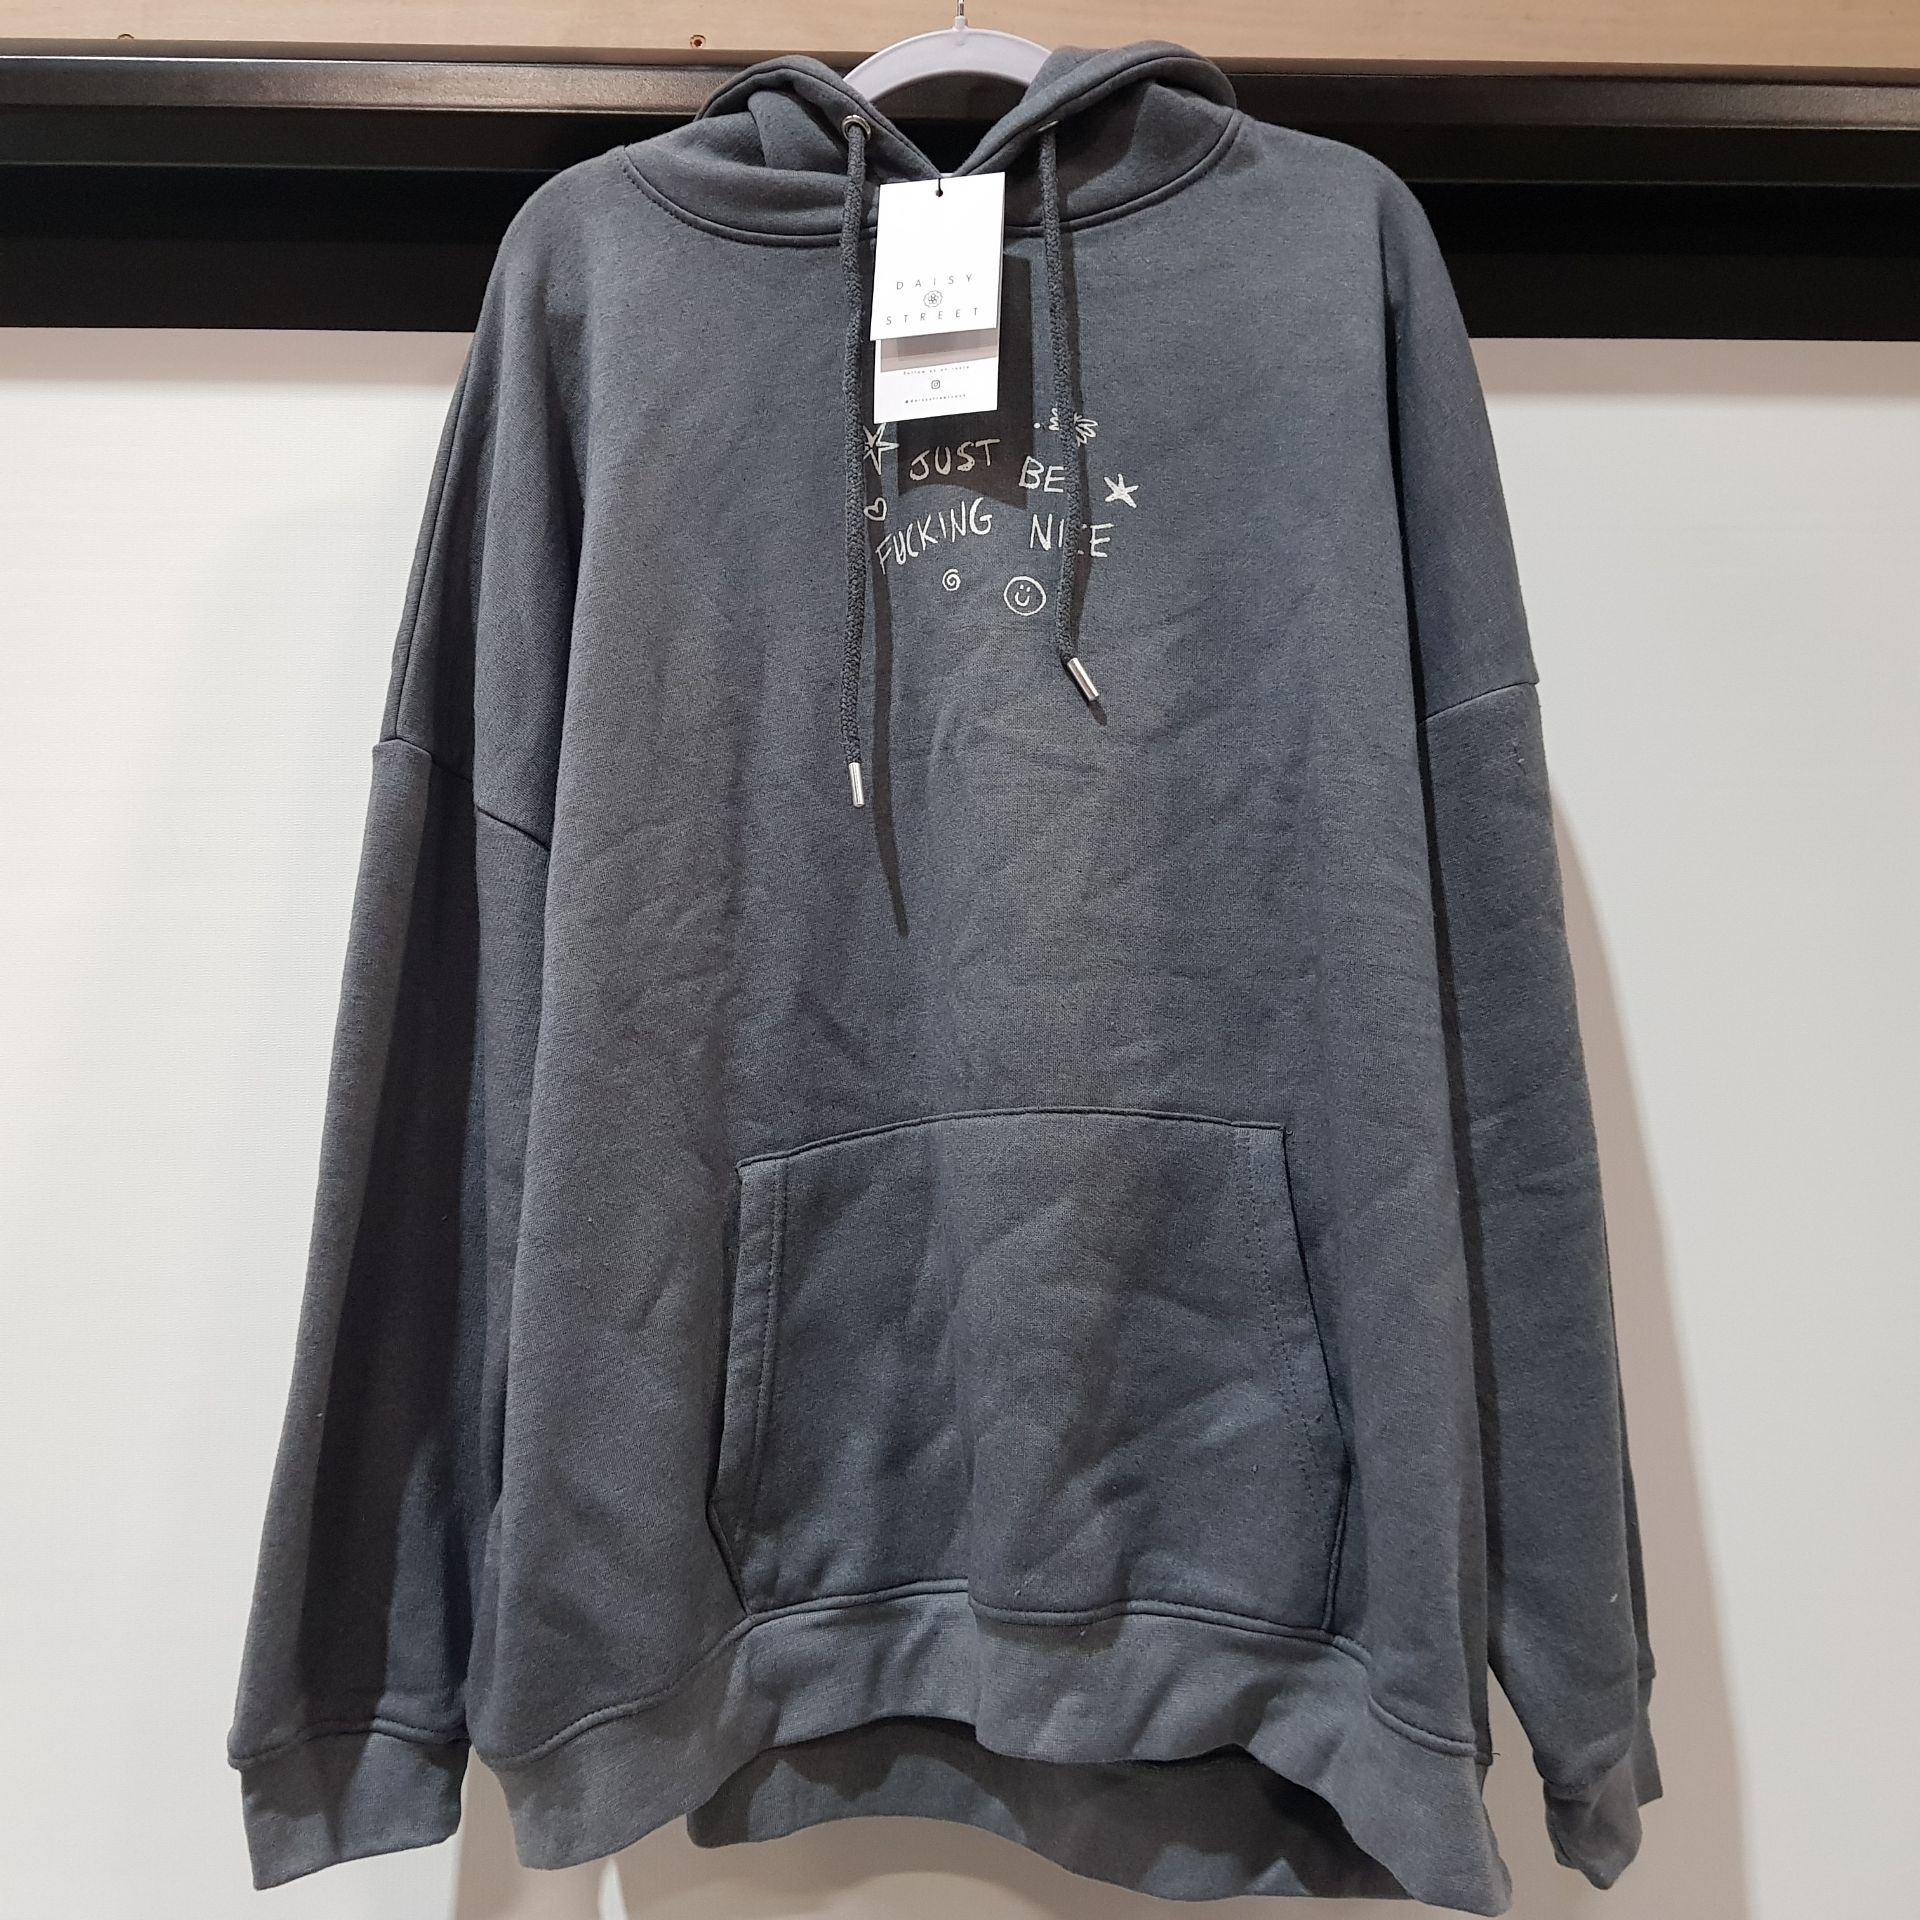 20 X BRAND NEW DAISY STREET HOODIES WITH JUST BE F**KING NICE IN CHARCOAL, 13 IN SIZE SMALL, 7 IN